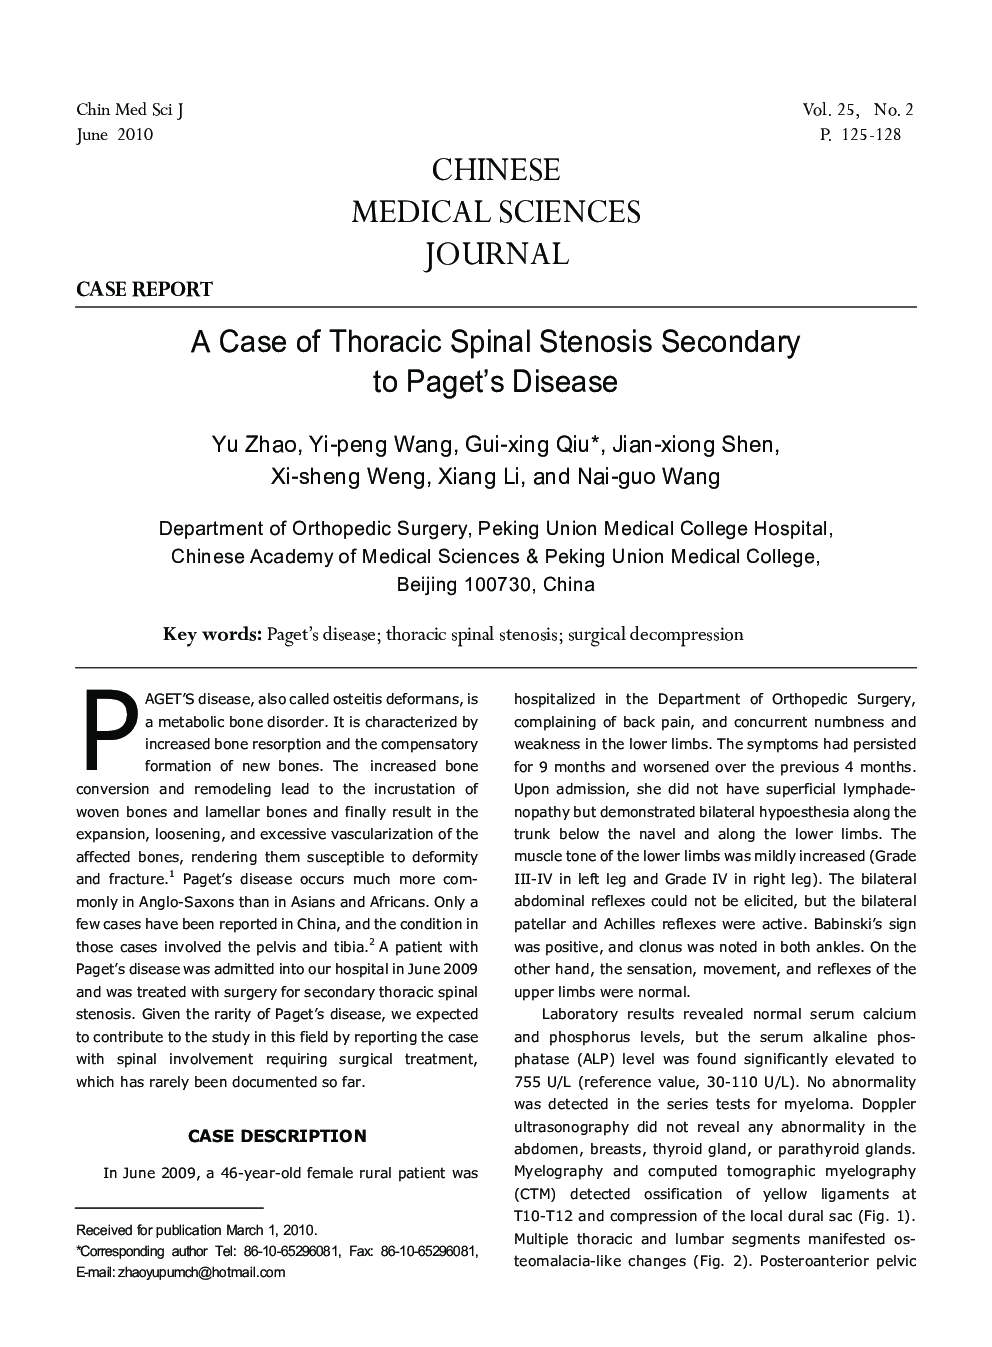 A Case of Thoracic Spinal Stenosis Secondary to Paget's Disease